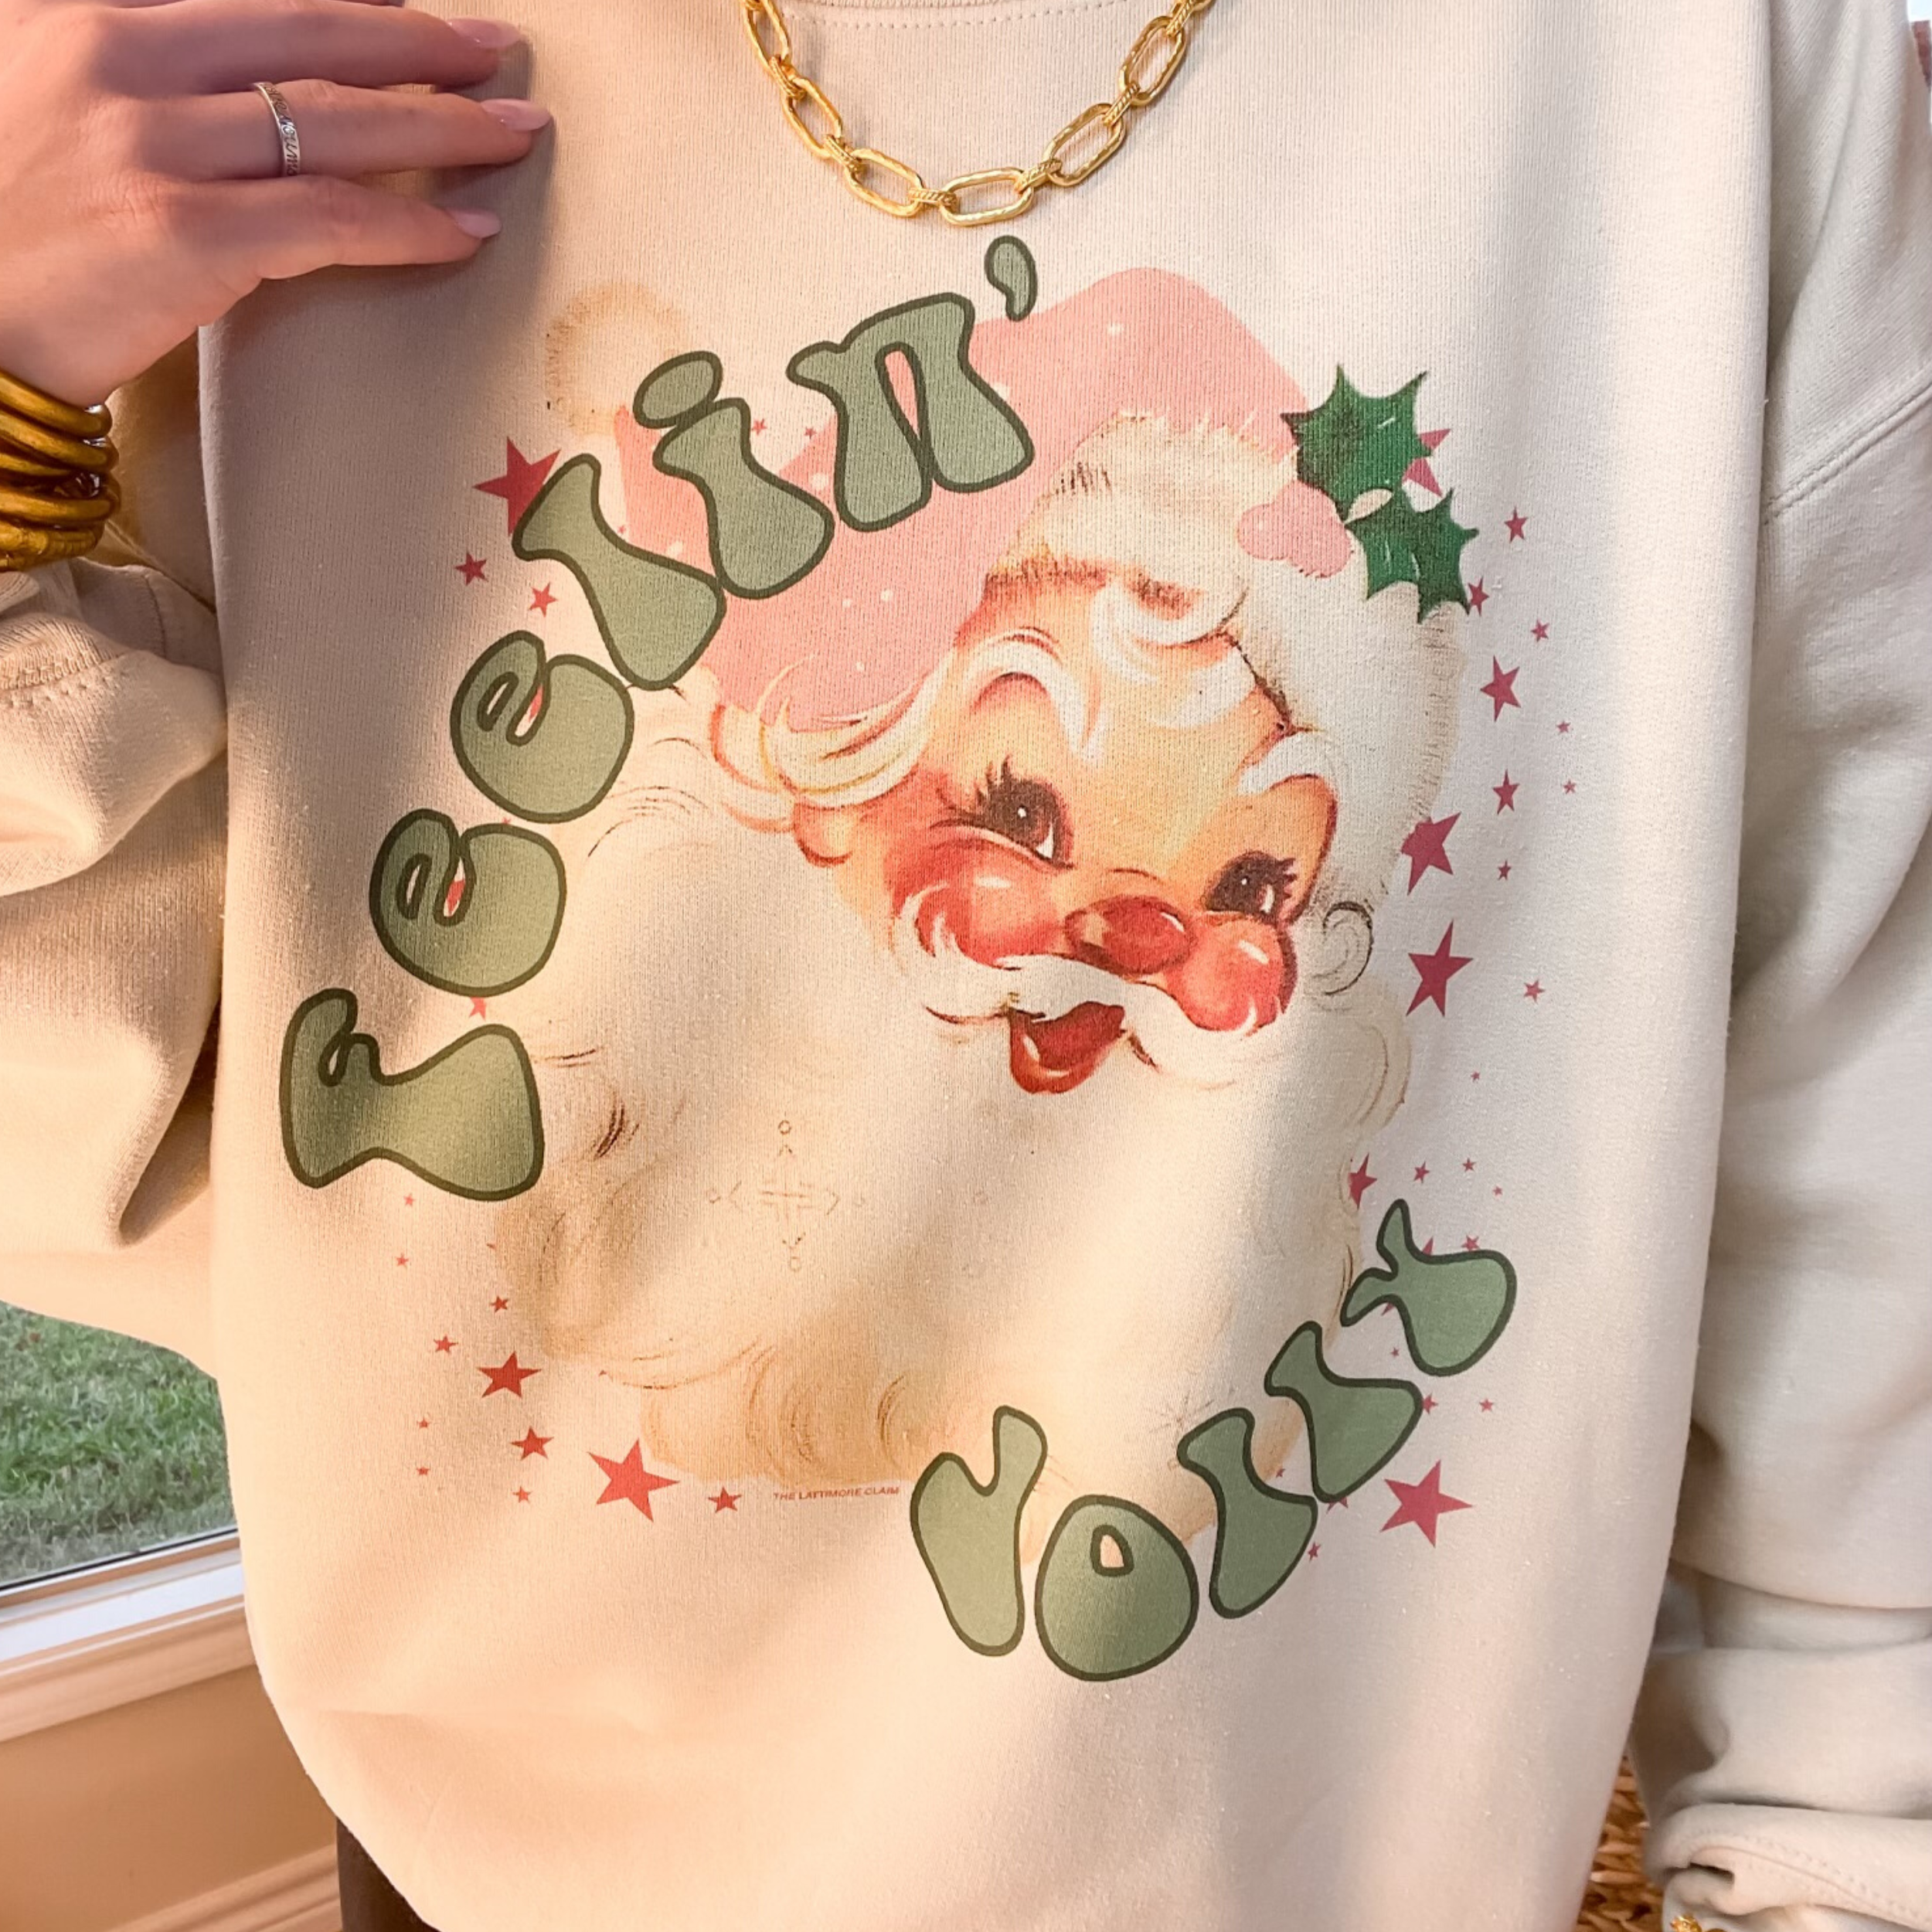 Photo features a cream sweatshirt with a graphic of santa and the words "Feelin' Jolly" in green. 